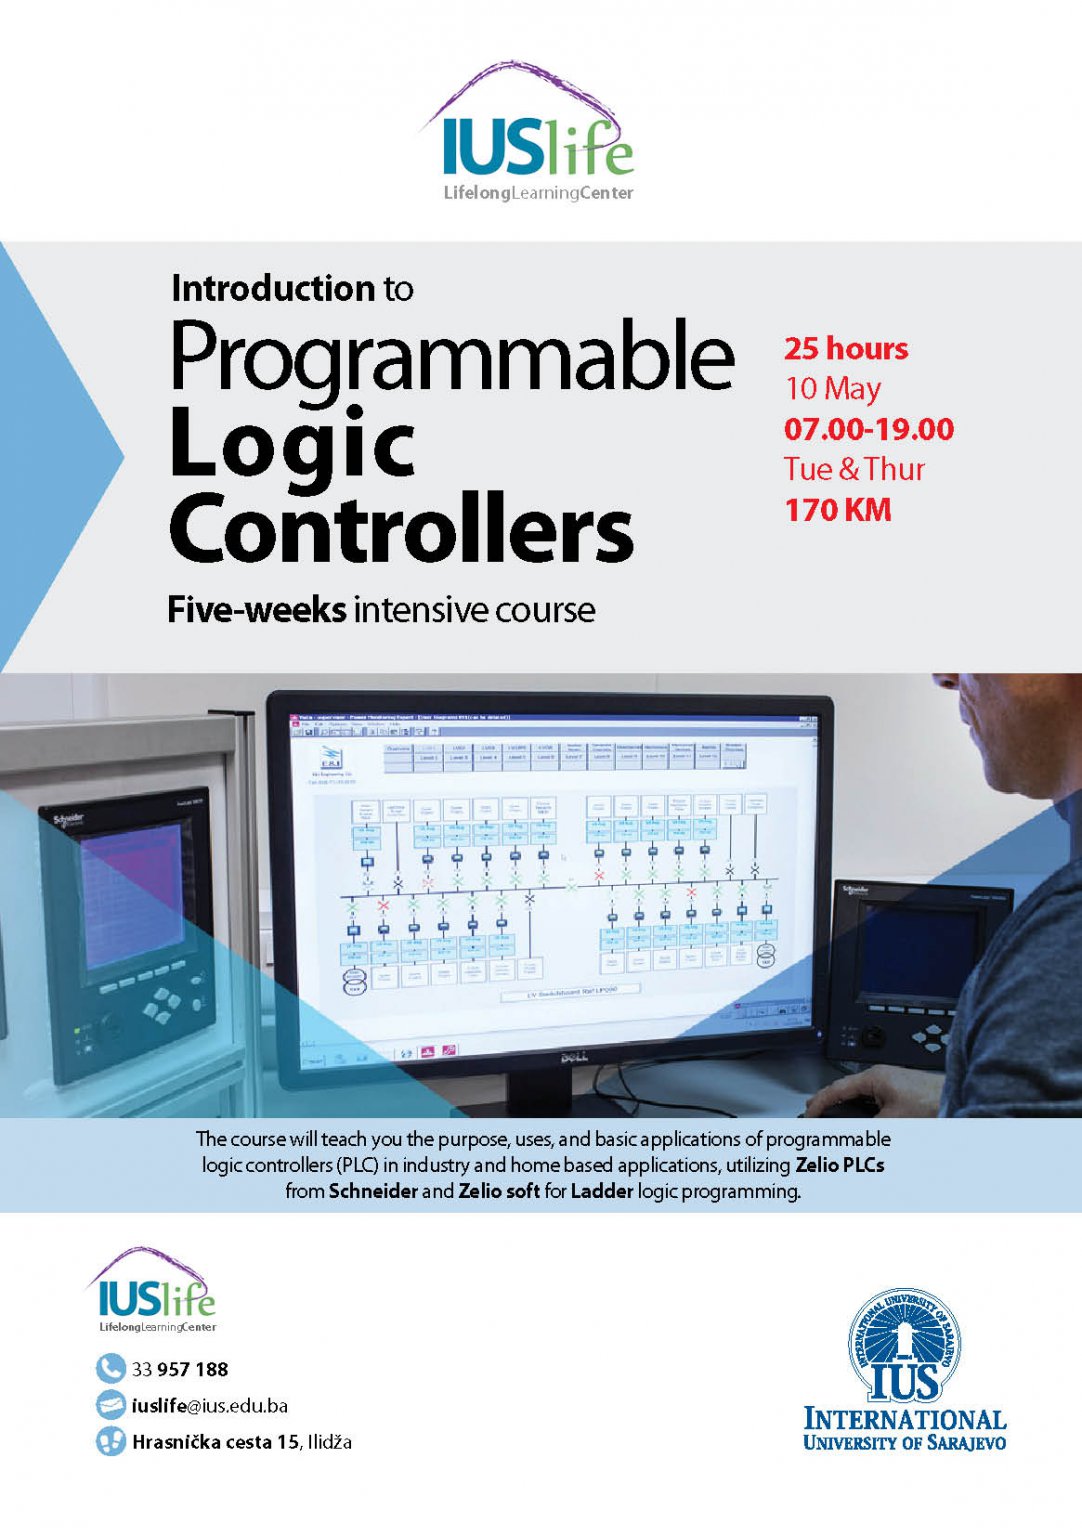  Introduction to Programmable Logic Controlles 